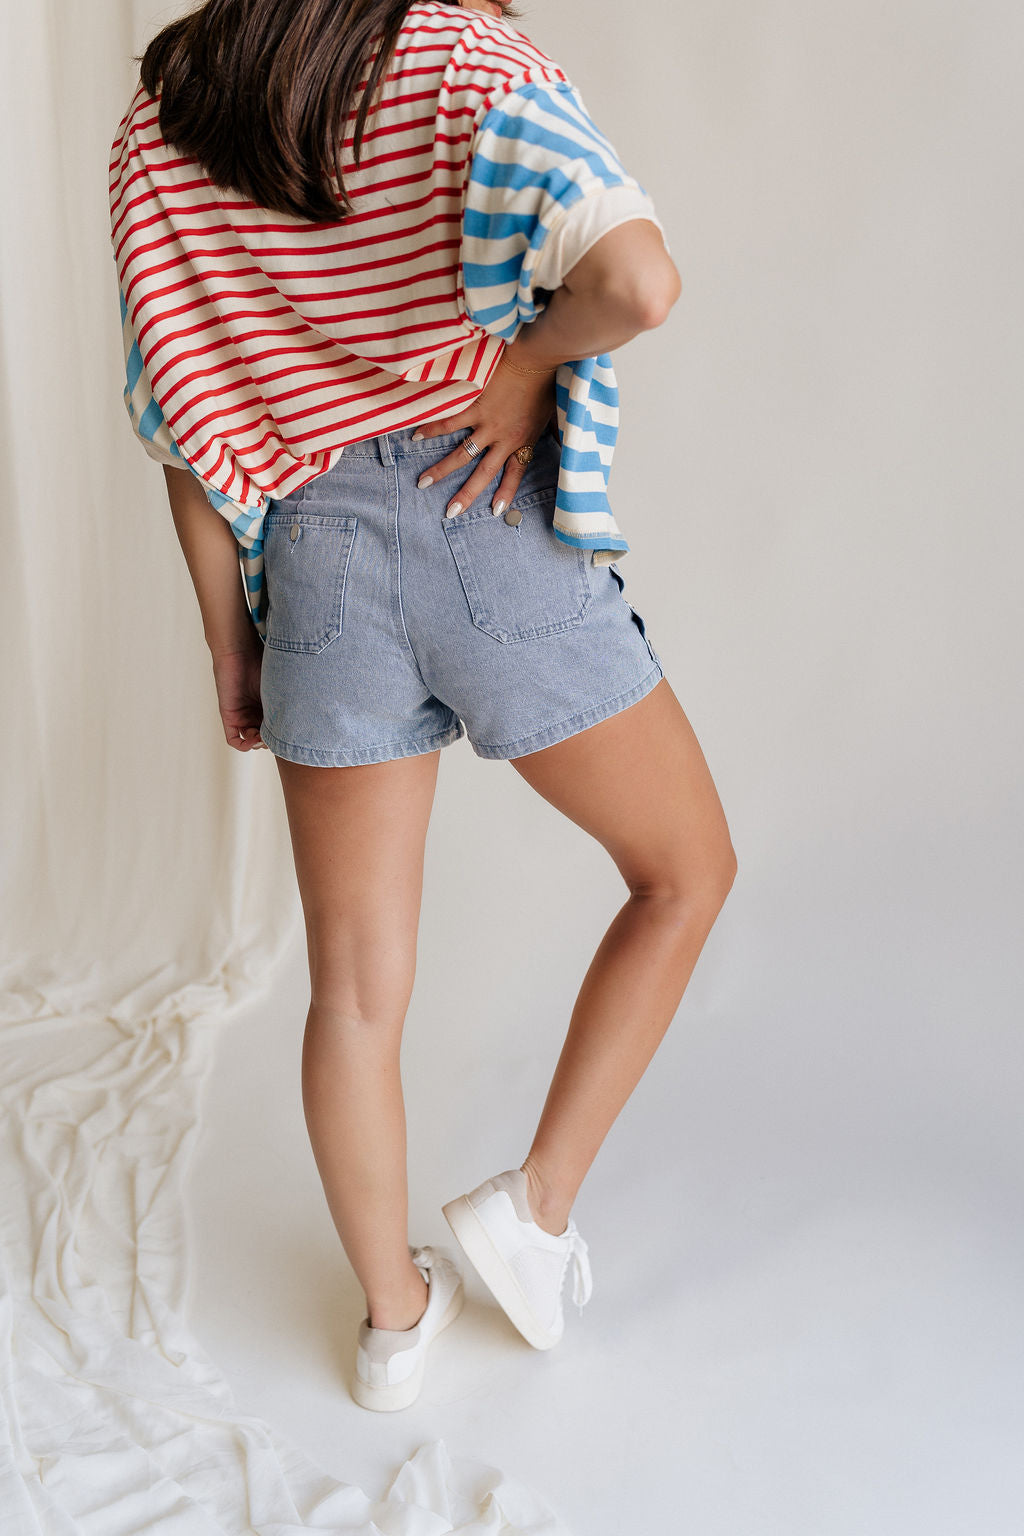 Back view of female model wearing the Hailey Silver Stud Denim Shorts that have light wash denim, silver stud details, pockets, and a front zipper.